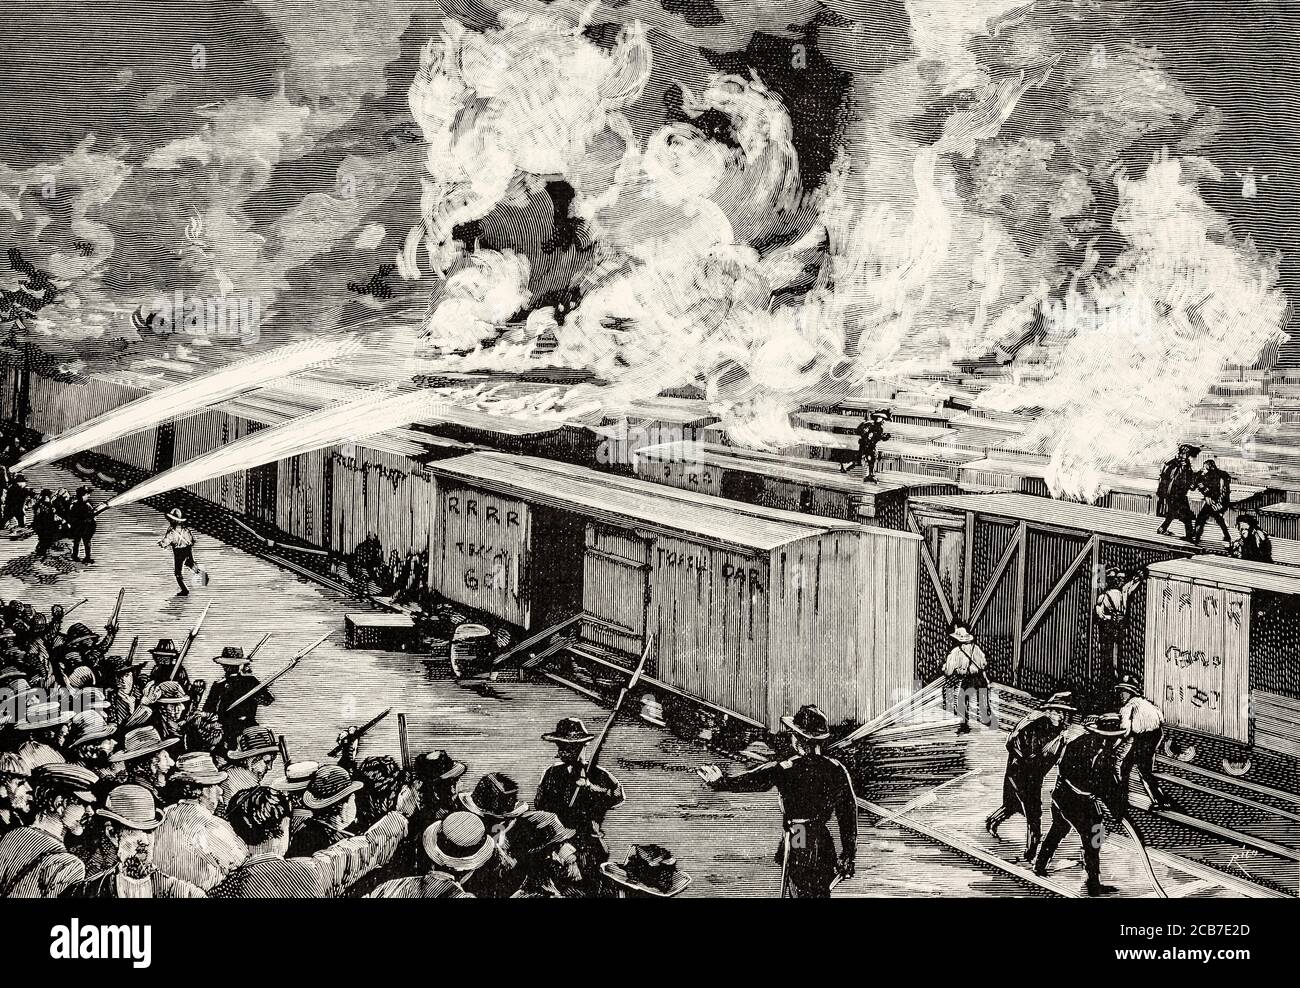 Rioters burning 600 freight cars during the Pullman Strike near Chicago 1894. United States of America. Old XIX century engraved illustration from La Ilustracion Española y Americana 1894 Stock Photo